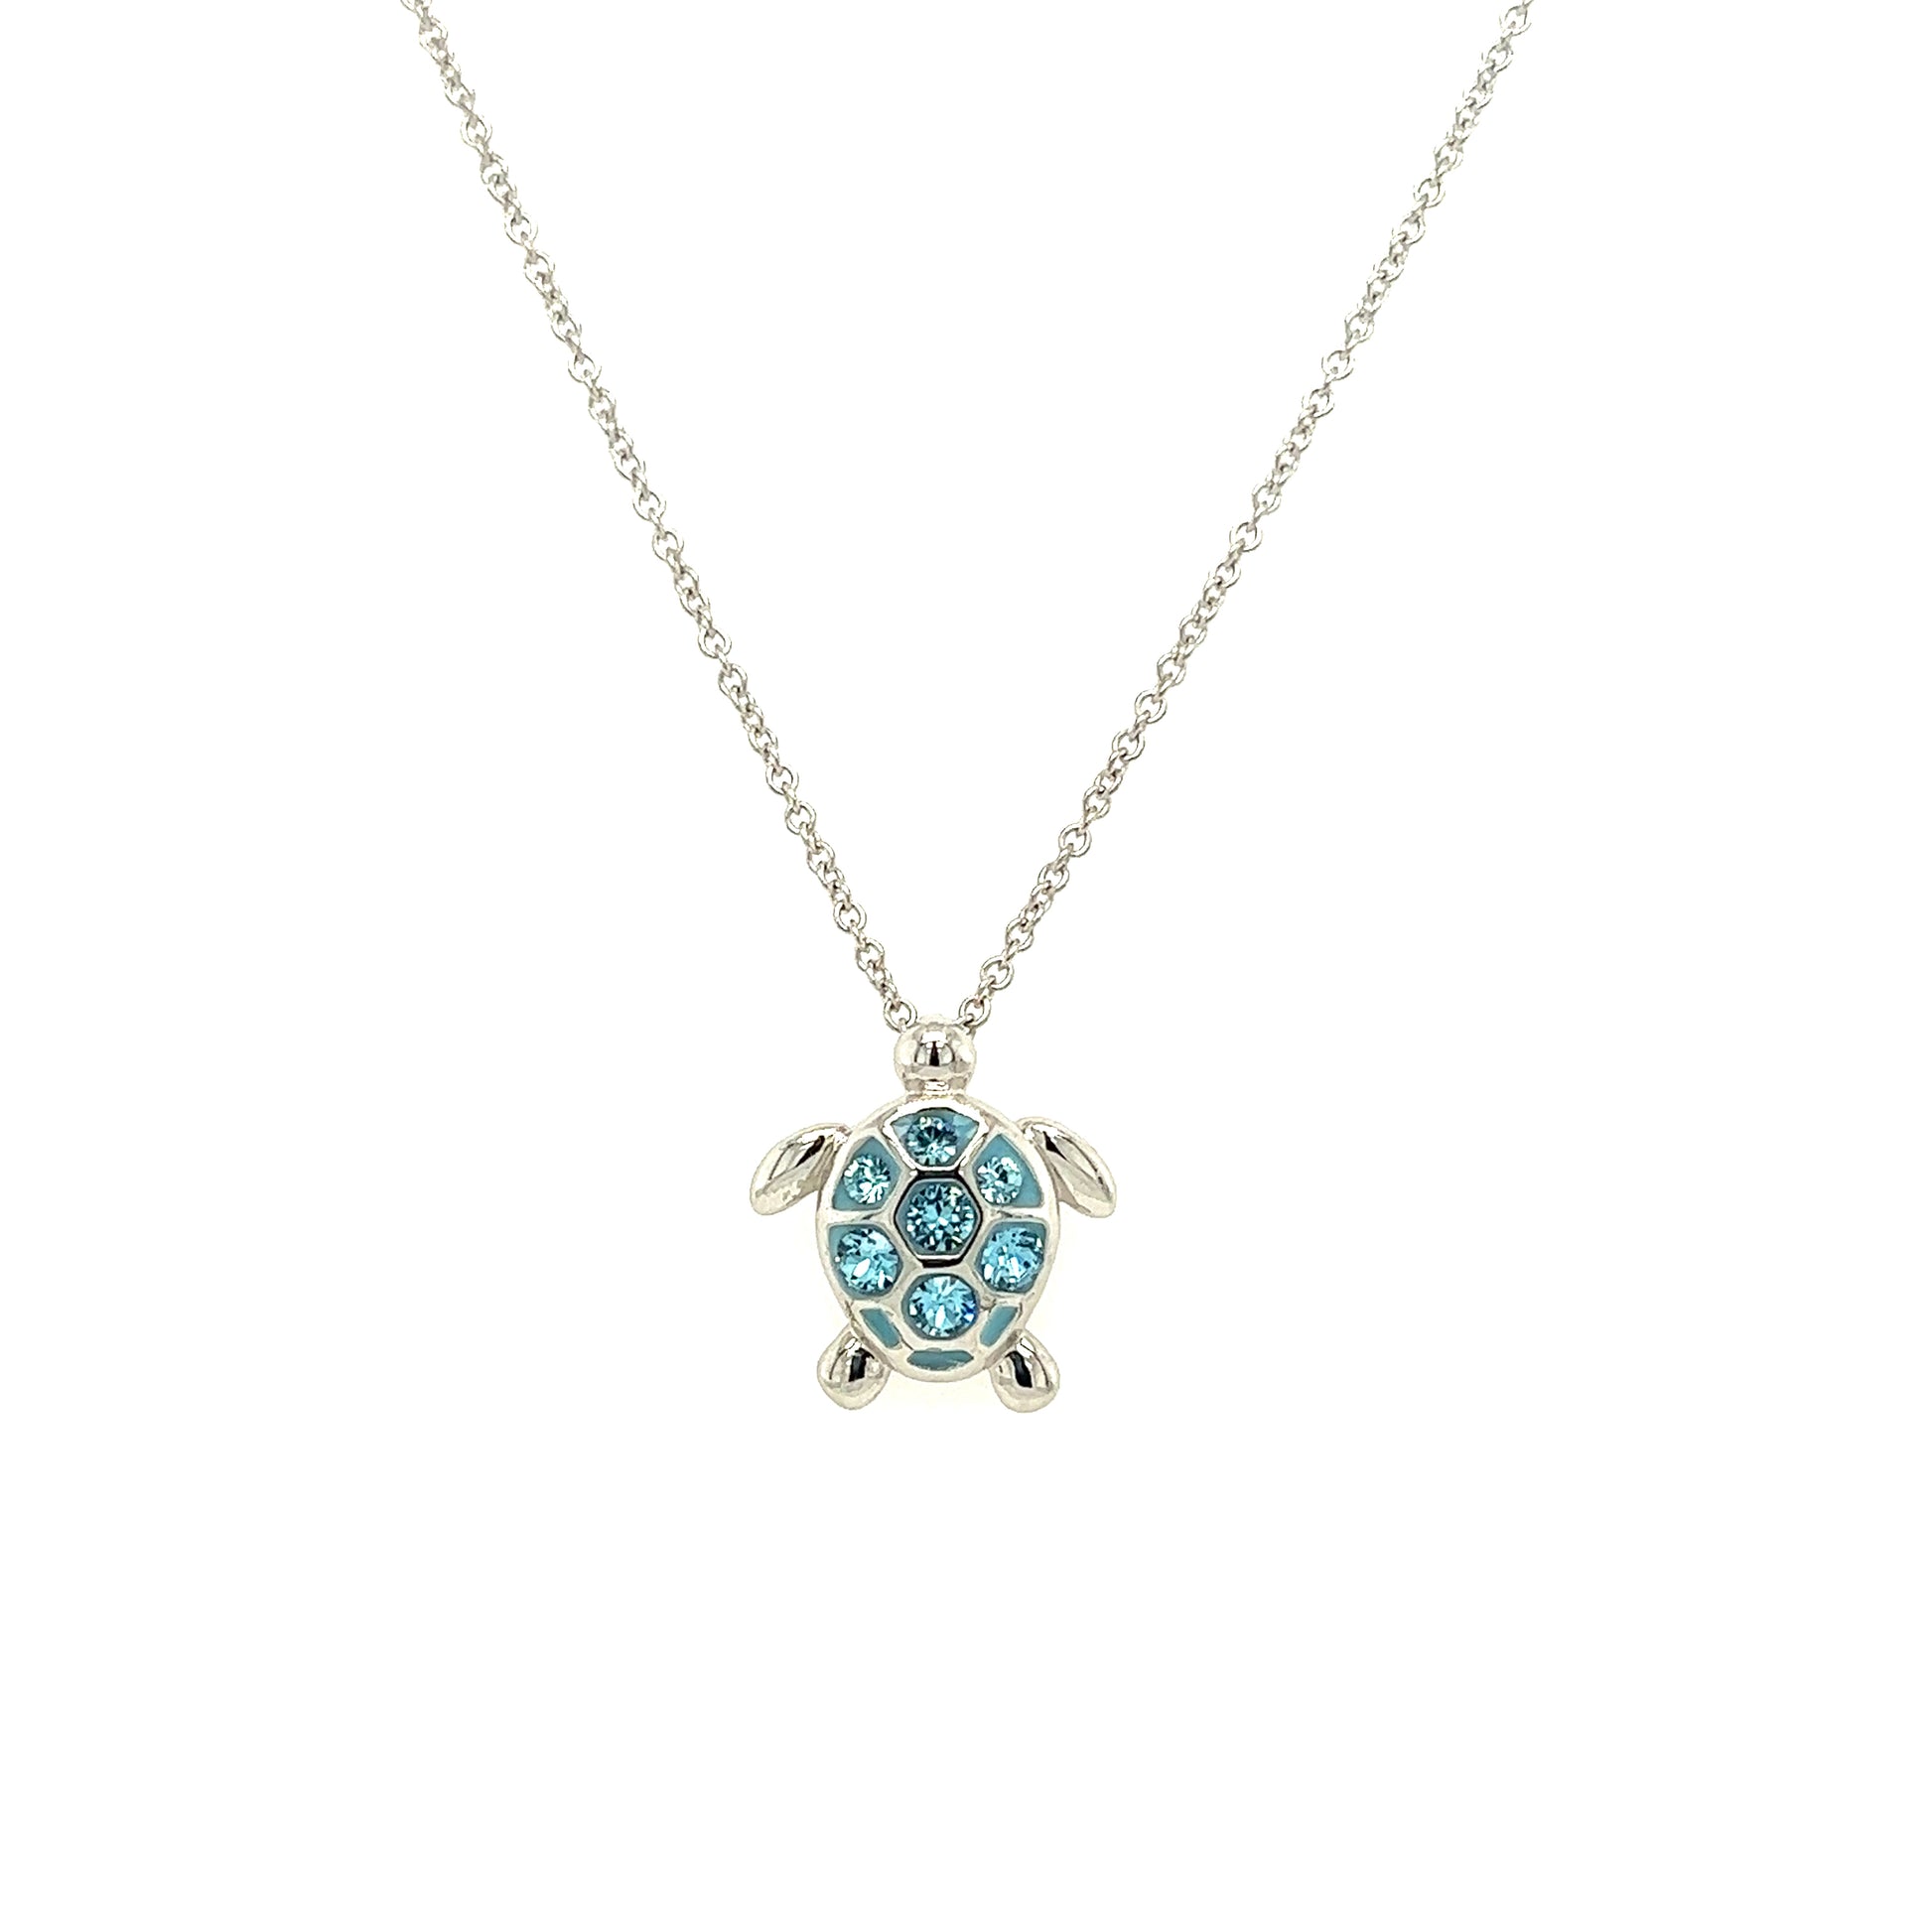 Aqua Sea Turtle Necklace with Aqua Crystals in Sterling Silver Front View